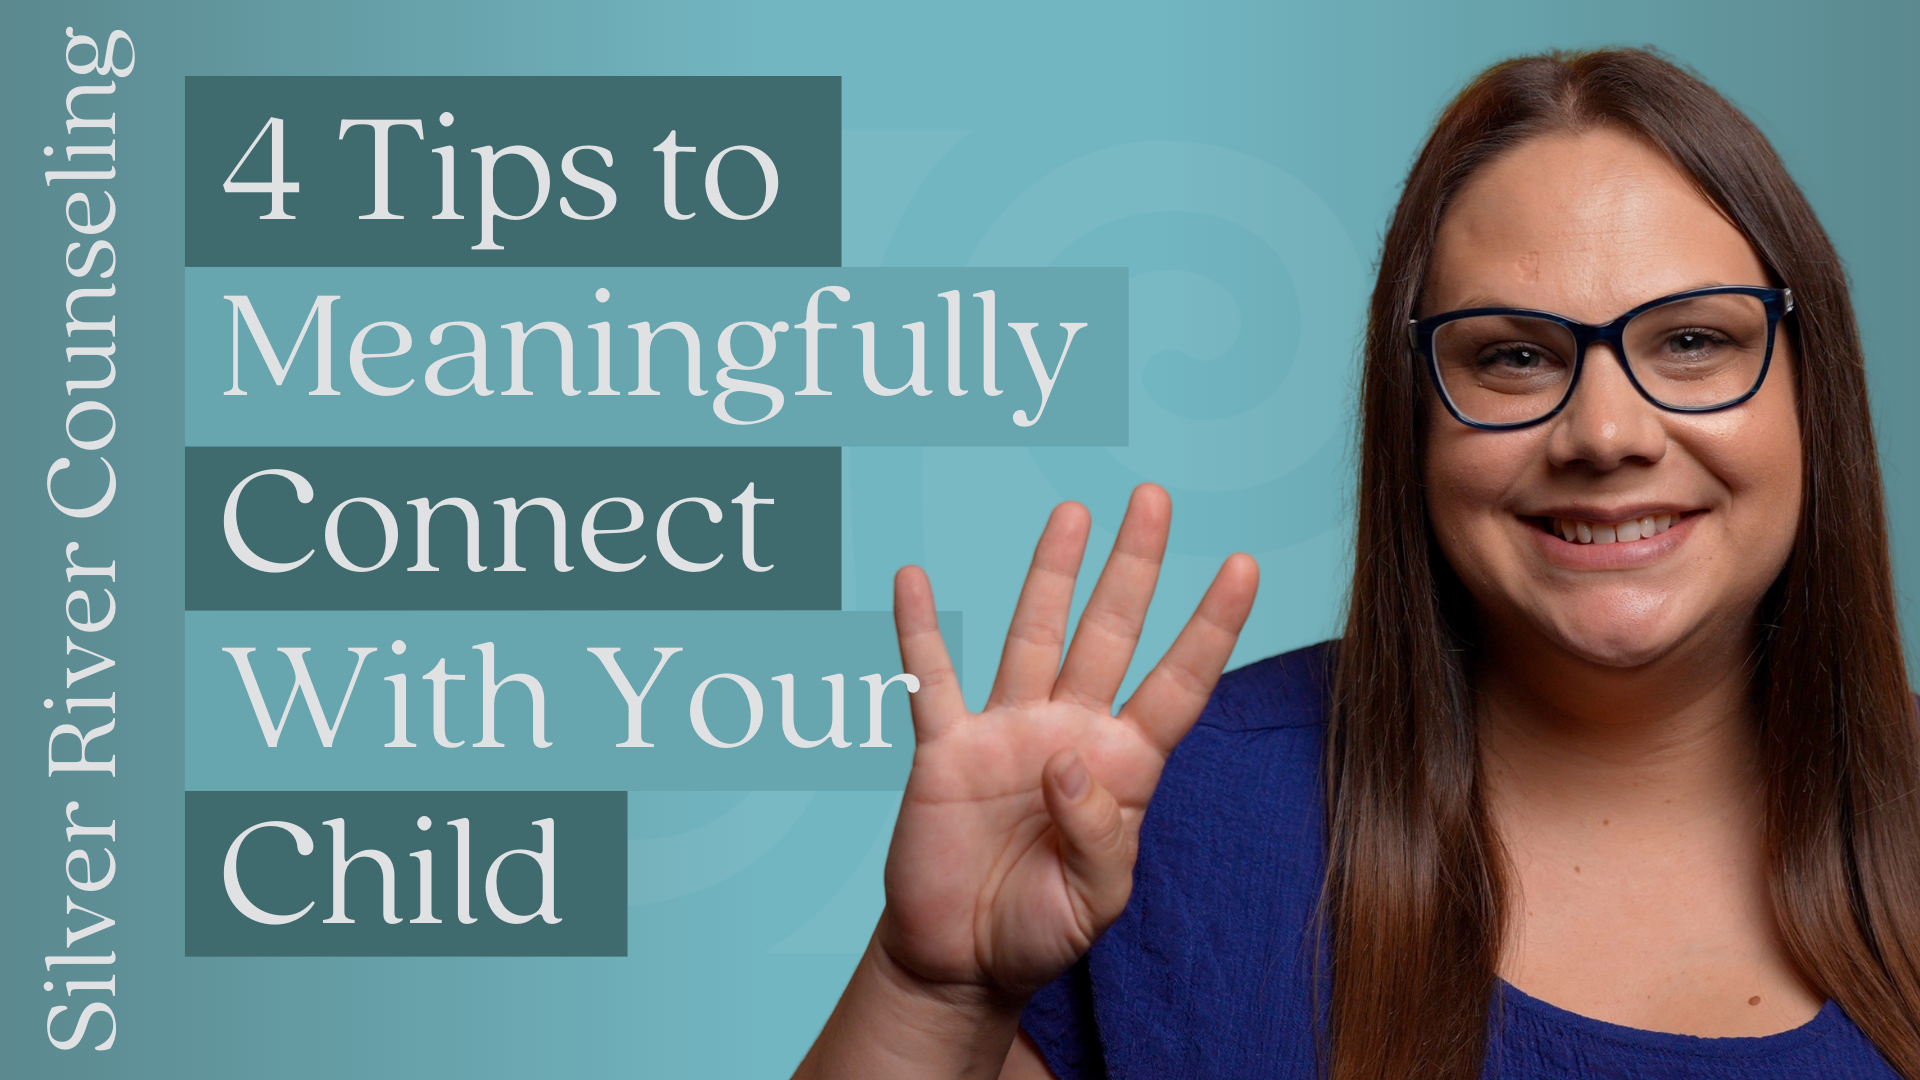 4 Tips to Meaningfully Connect With Your Child - Silver River Counseling